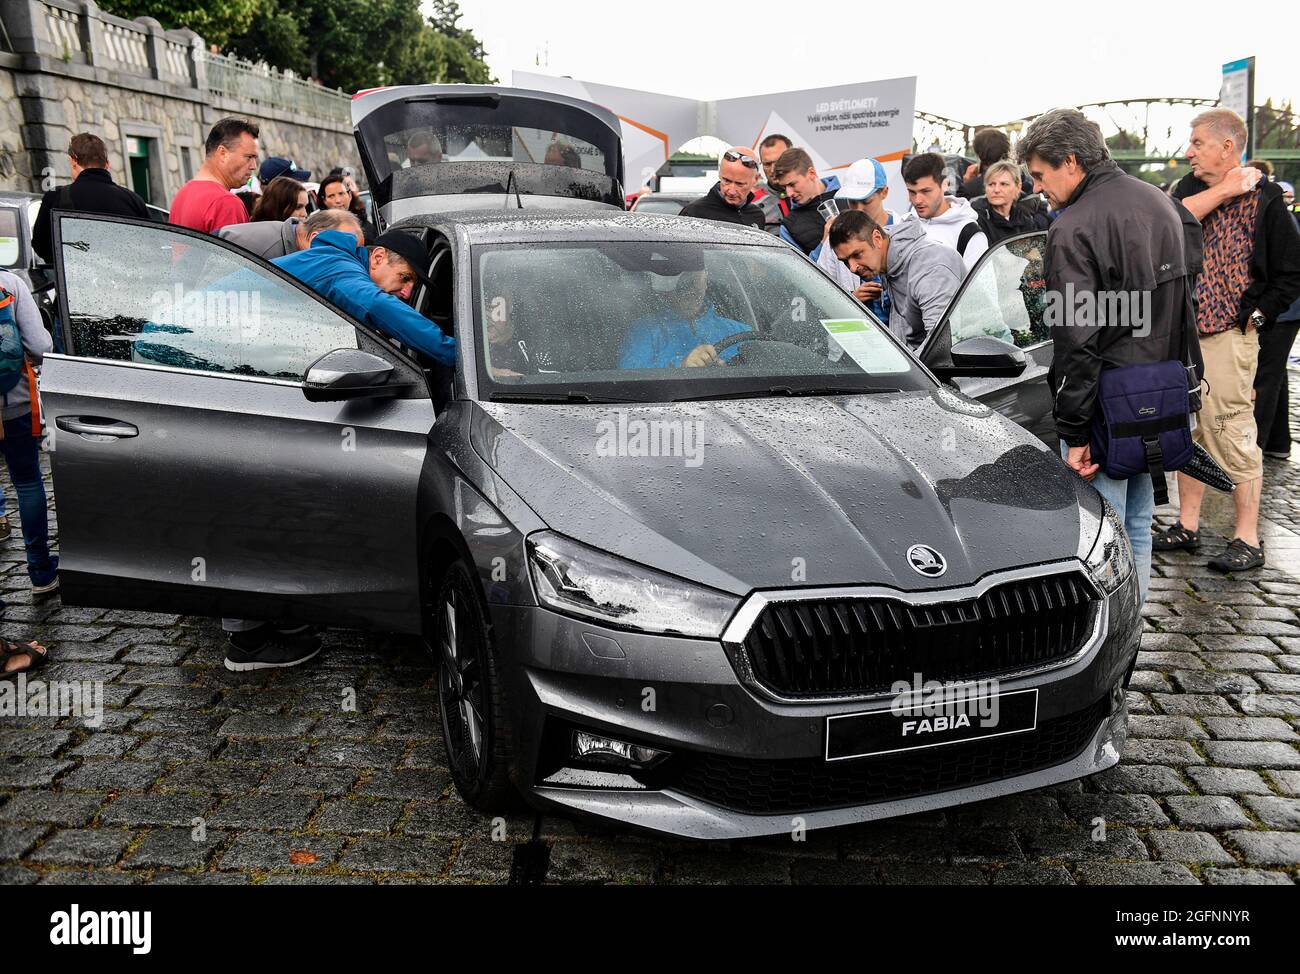 Prague, Czech Republic. 26th Aug, 2021. The fourth-generation Skoda Fabia  car is exposed in world premiere at the exhibition "Auta na naplavce" in  Prague, Czech Republic, on August 26, 2021. Credit: Roman